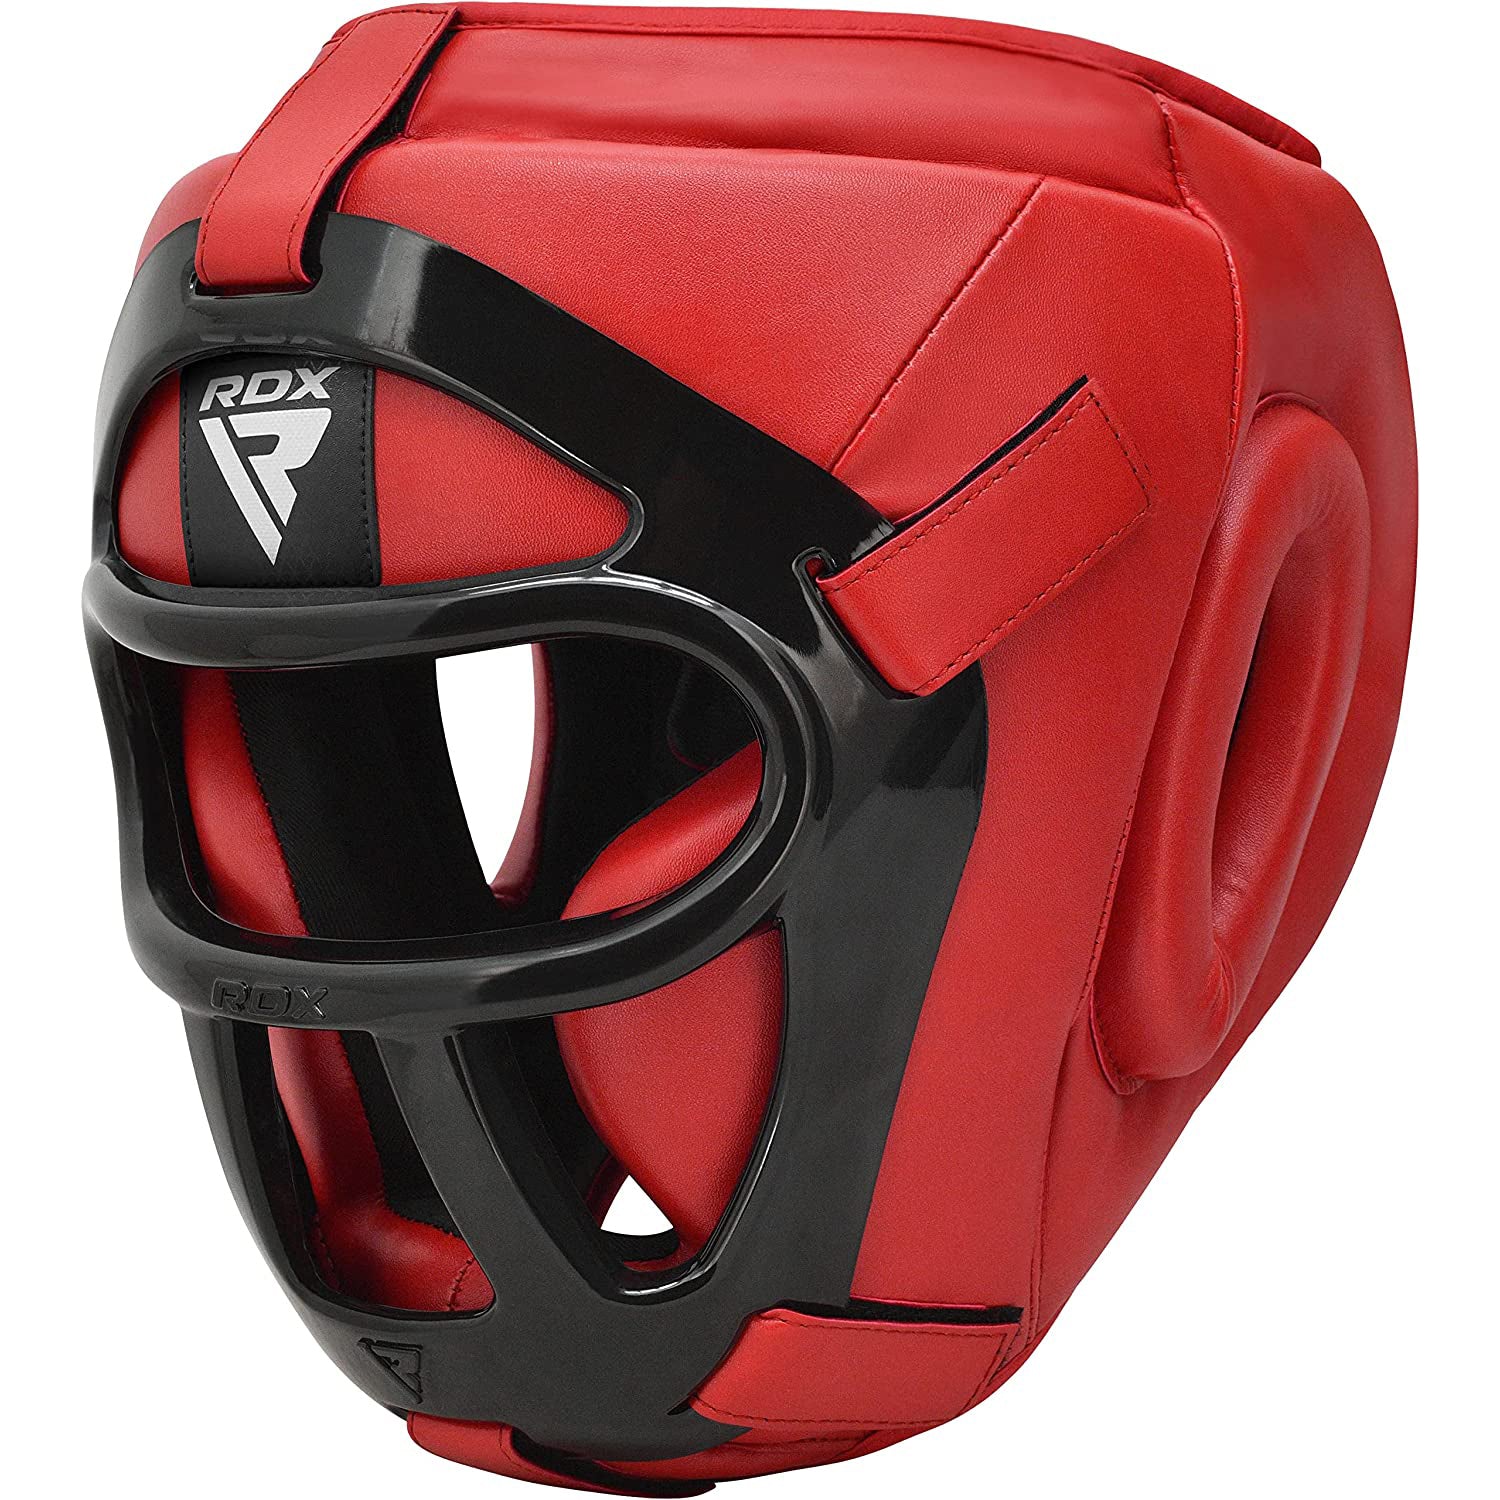 RDX T1 Full Face Protection Headgear for Boxing, MMA, BJJ, Muay Thai, Kickboxing - RED - EXTRA LARGE - Pro-Distributing